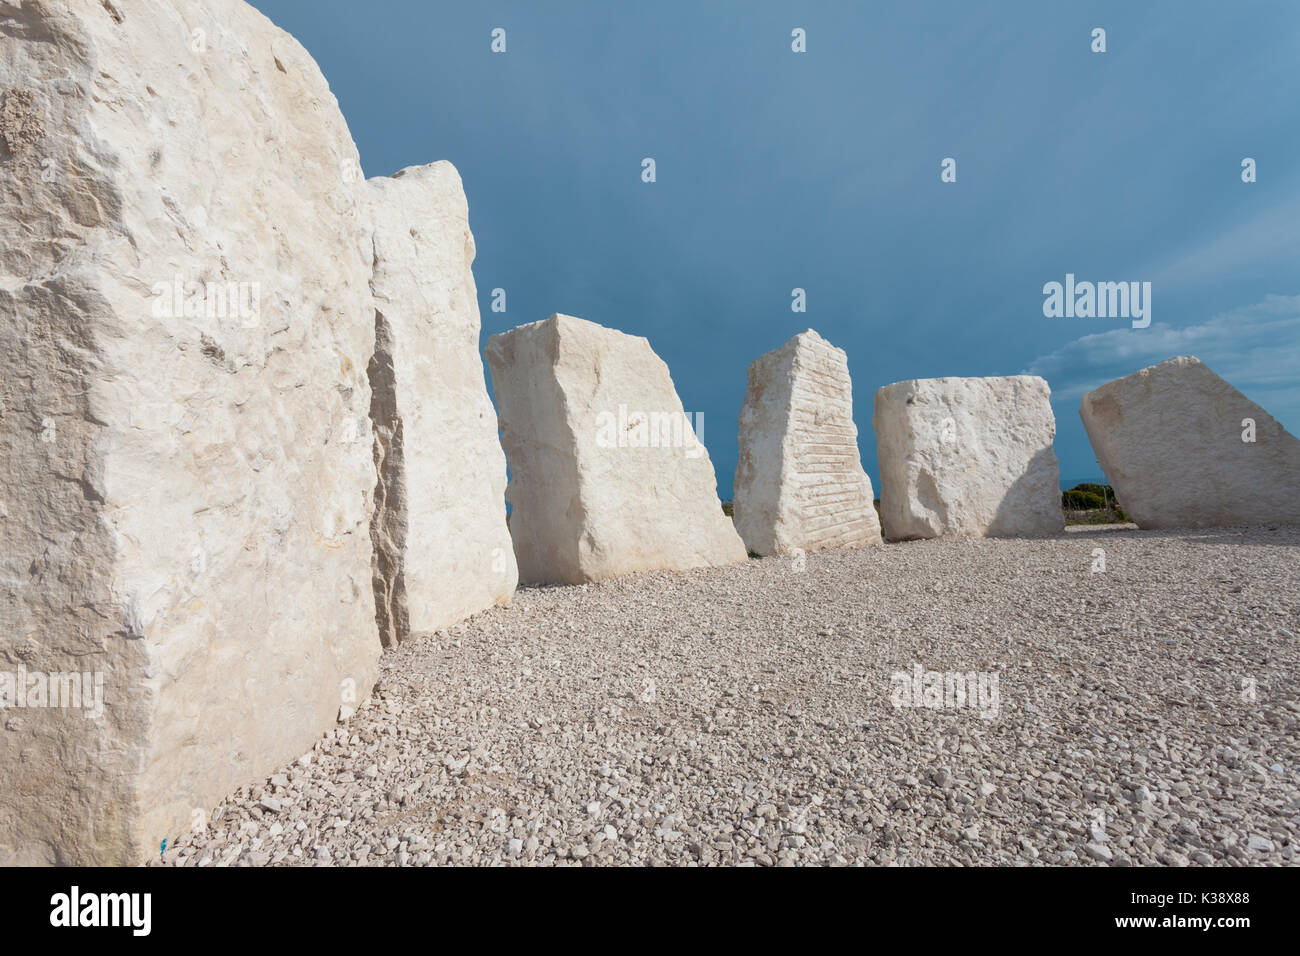 Standing stones or stone circle on Portland, Dorset UK, which are new but imitating neolithic sites Stock Photo